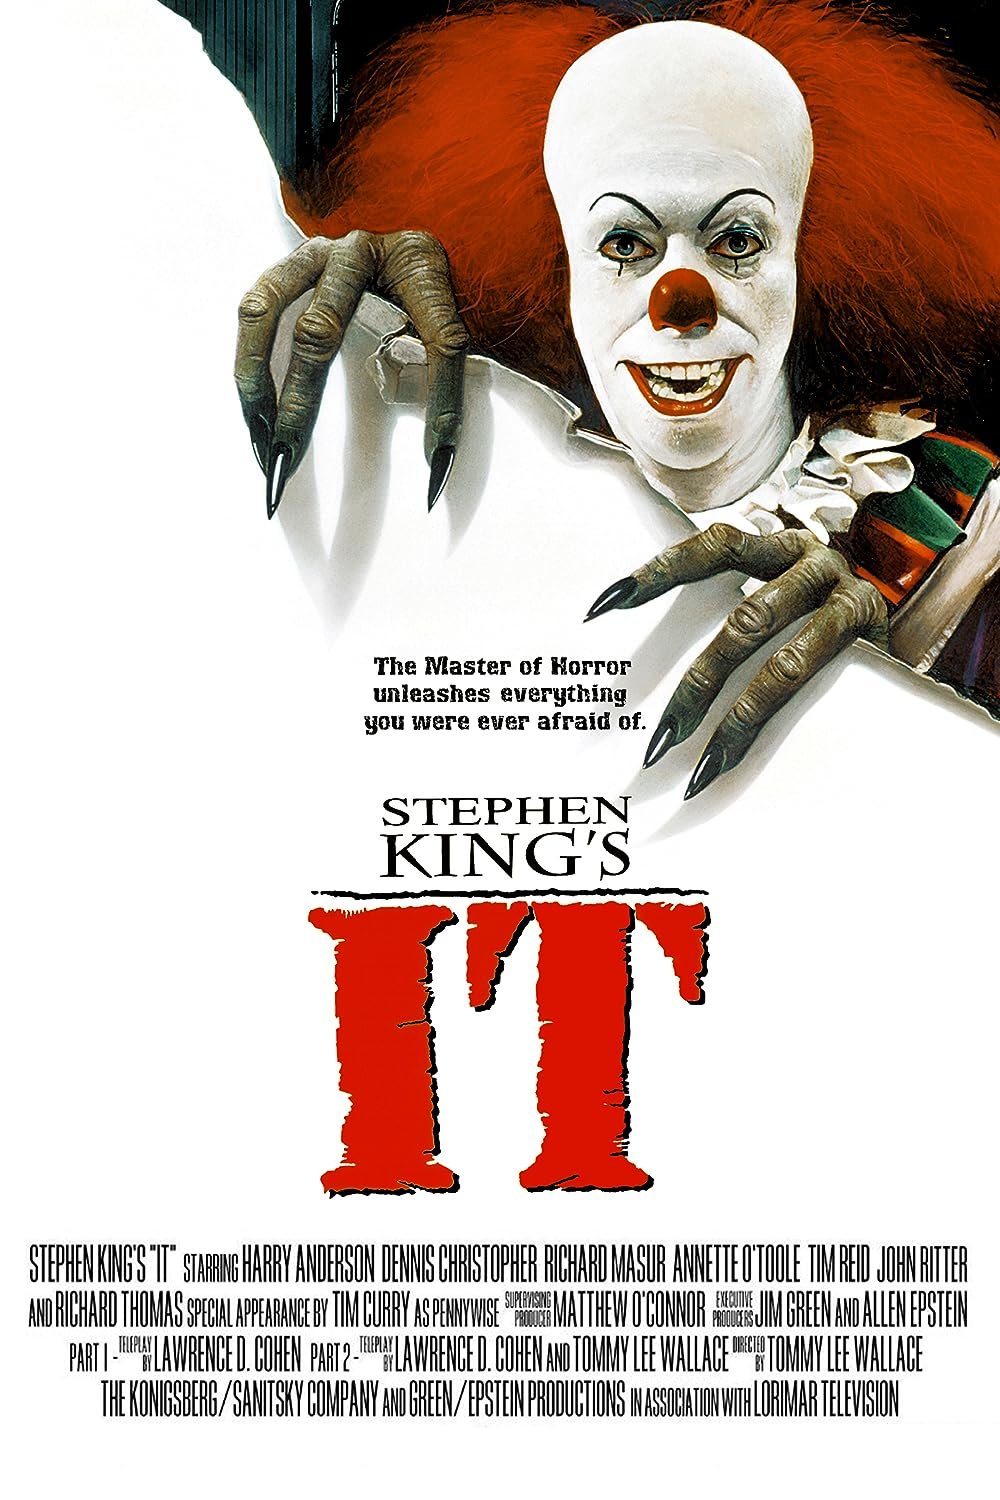 50) It: Chapters One and Two (2017 & 2019) - IMDb: 6.5